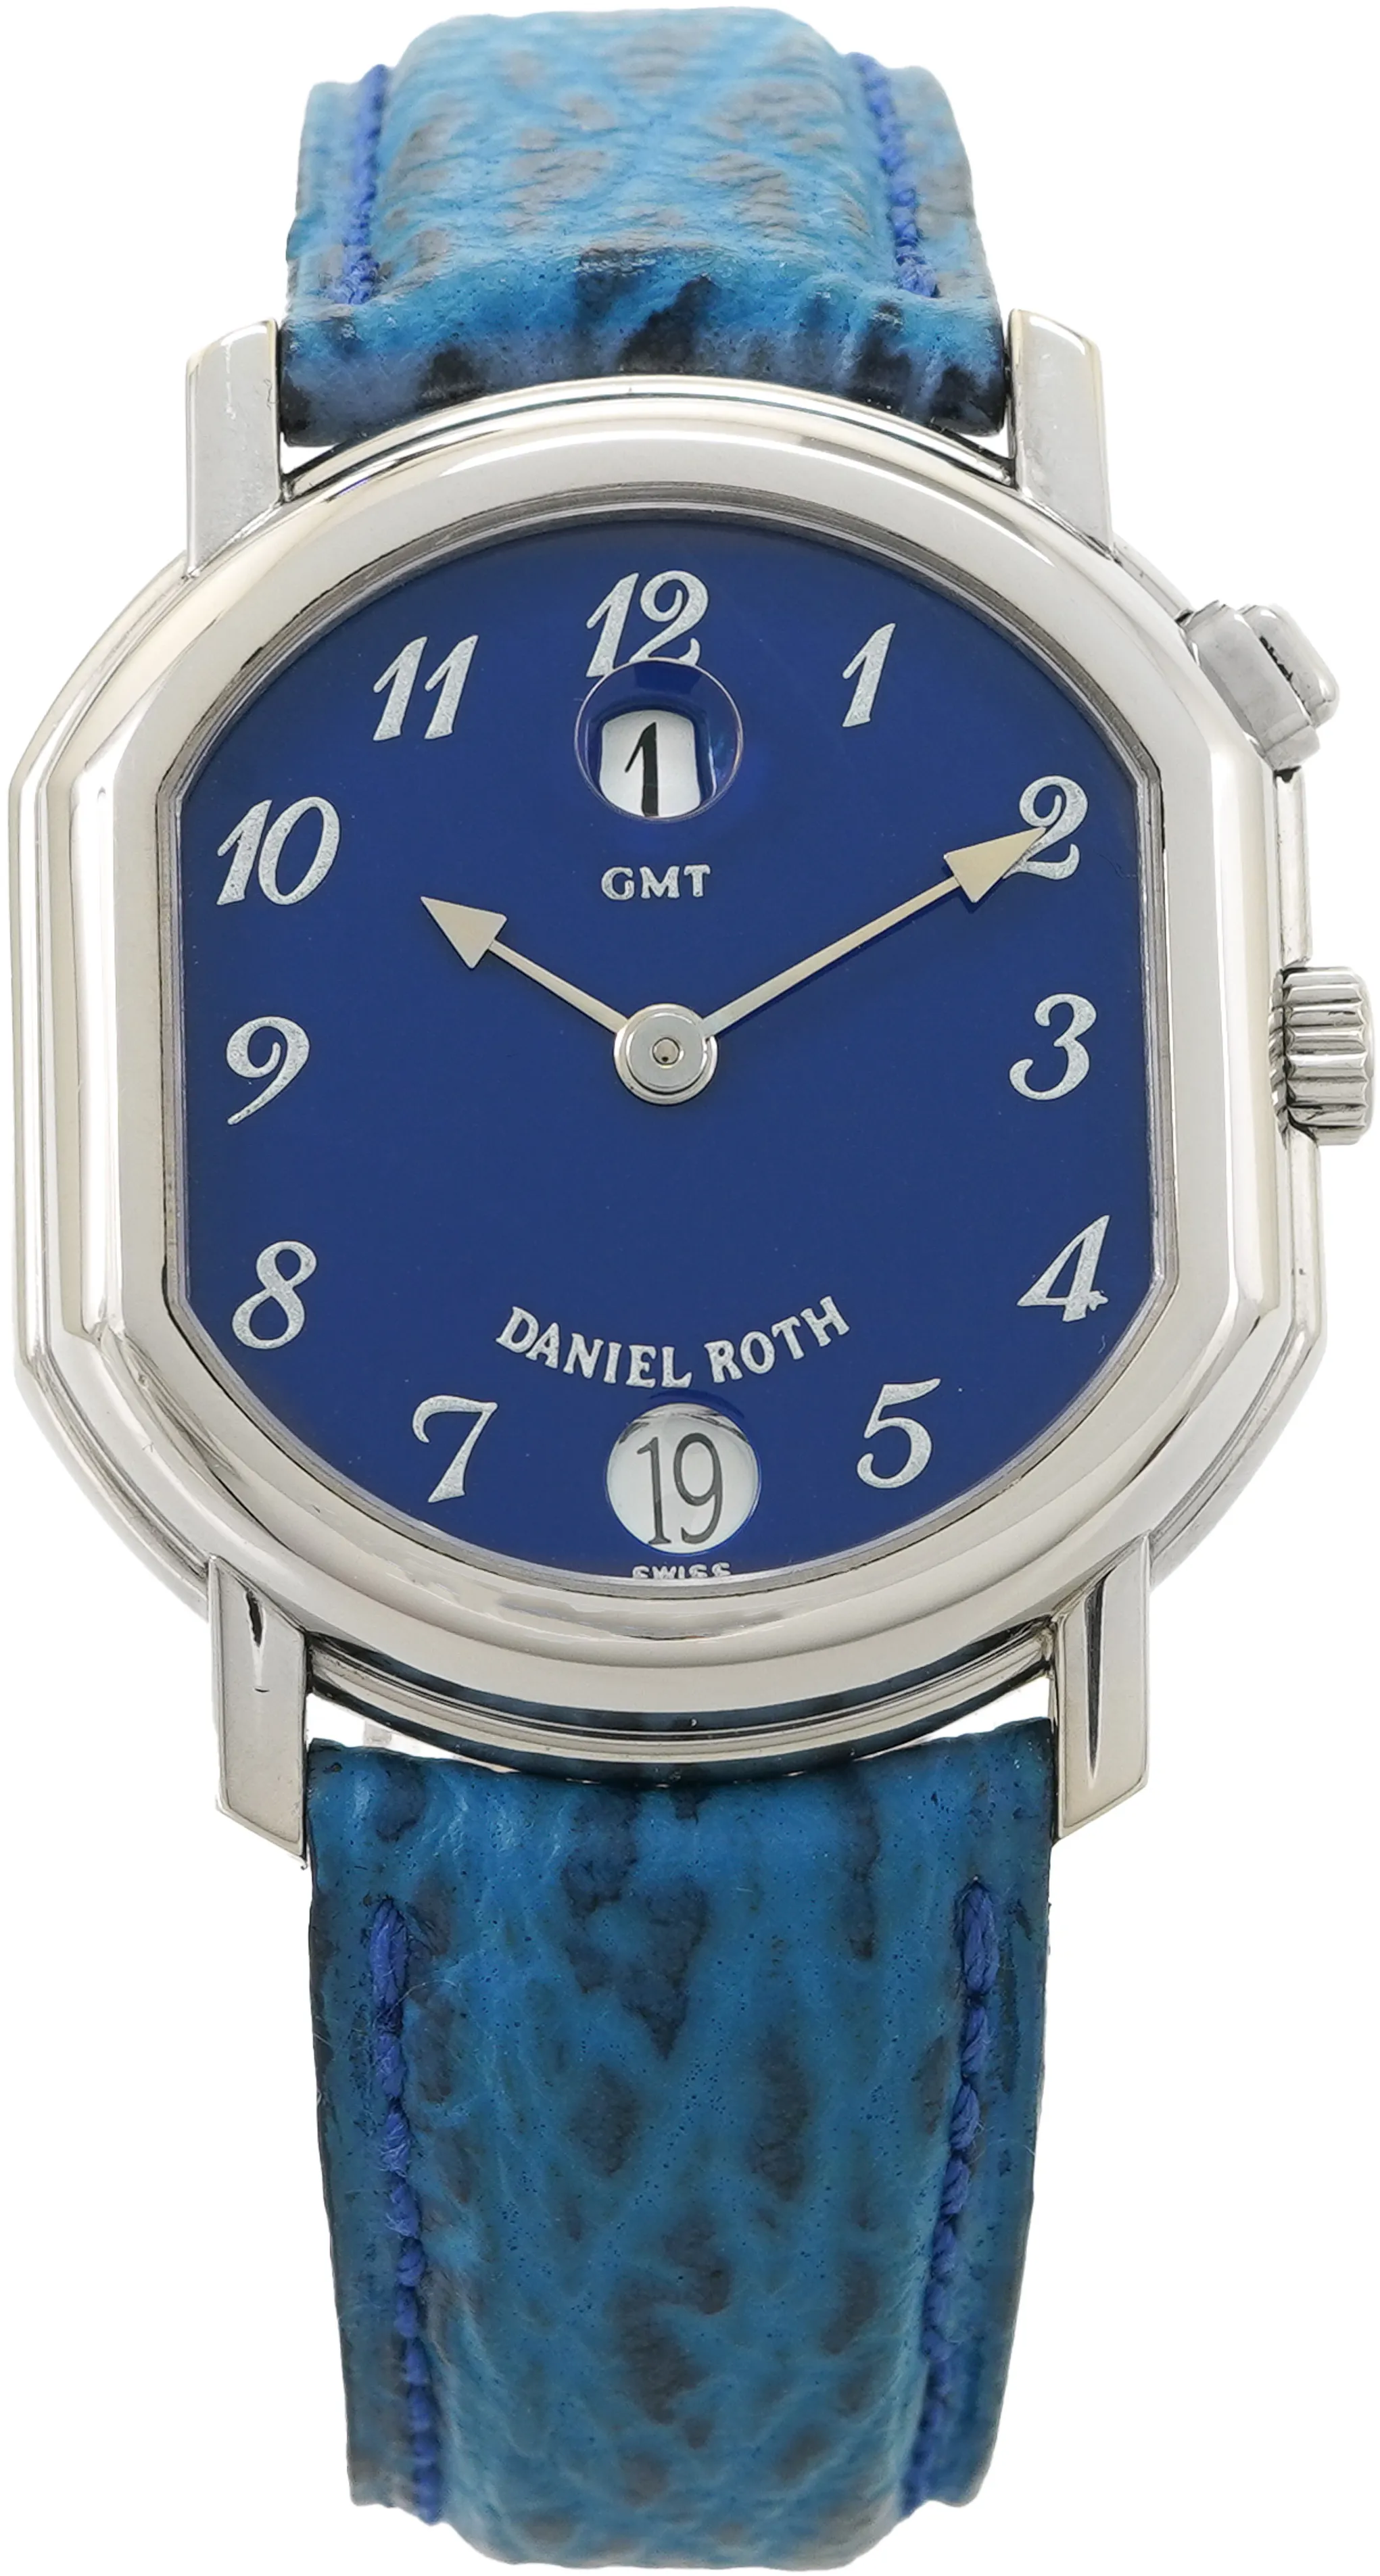 Daniel Roth GMT S247.1 33mm Stainless steel Blue